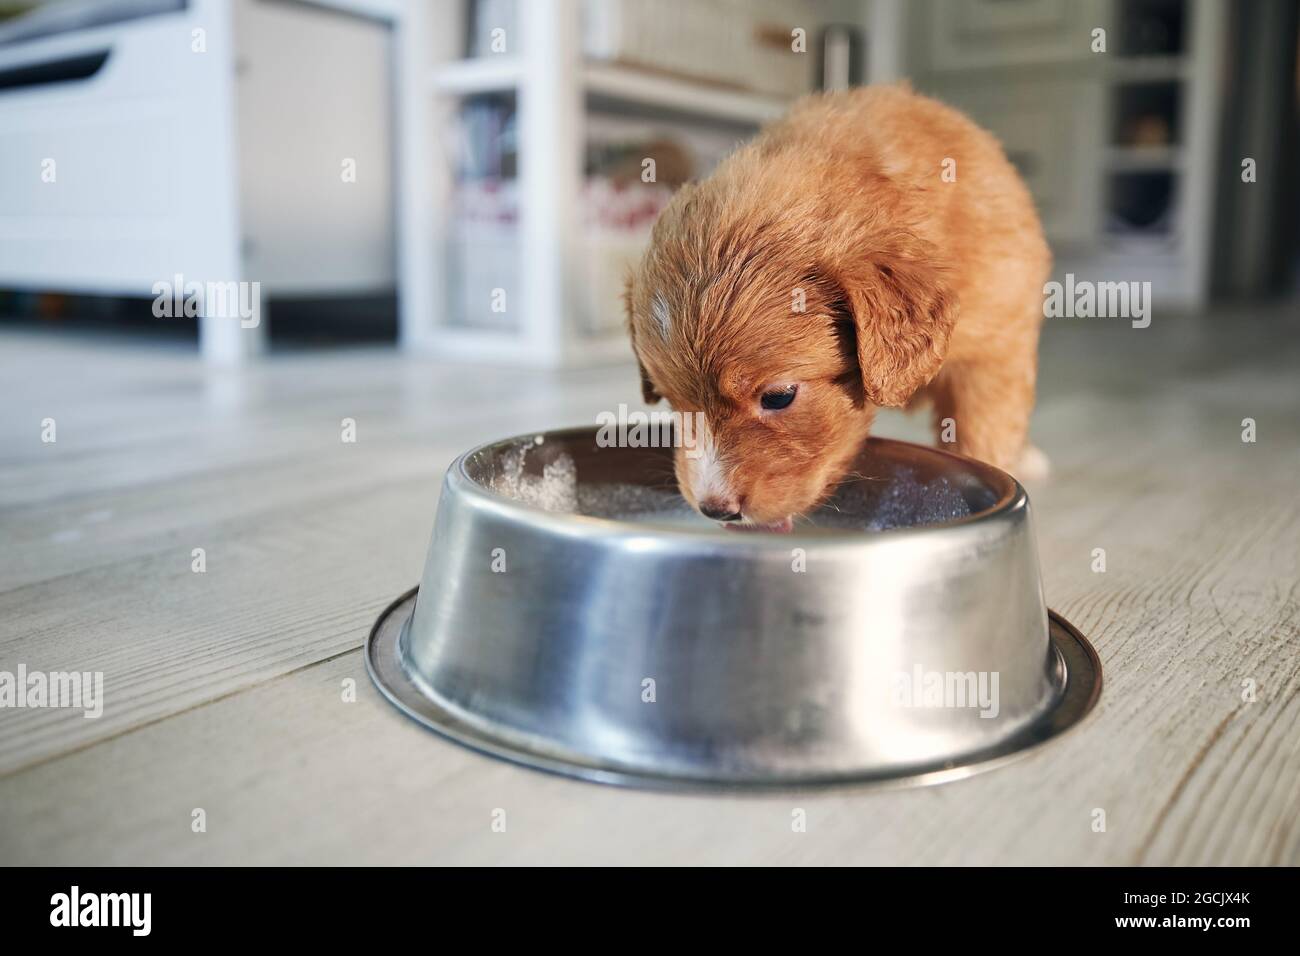 Feeding of hungry dog. Puppy of Nova Scotia Duck Tolling Retriever eating milk from metal bowl at home kitchen. Stock Photo